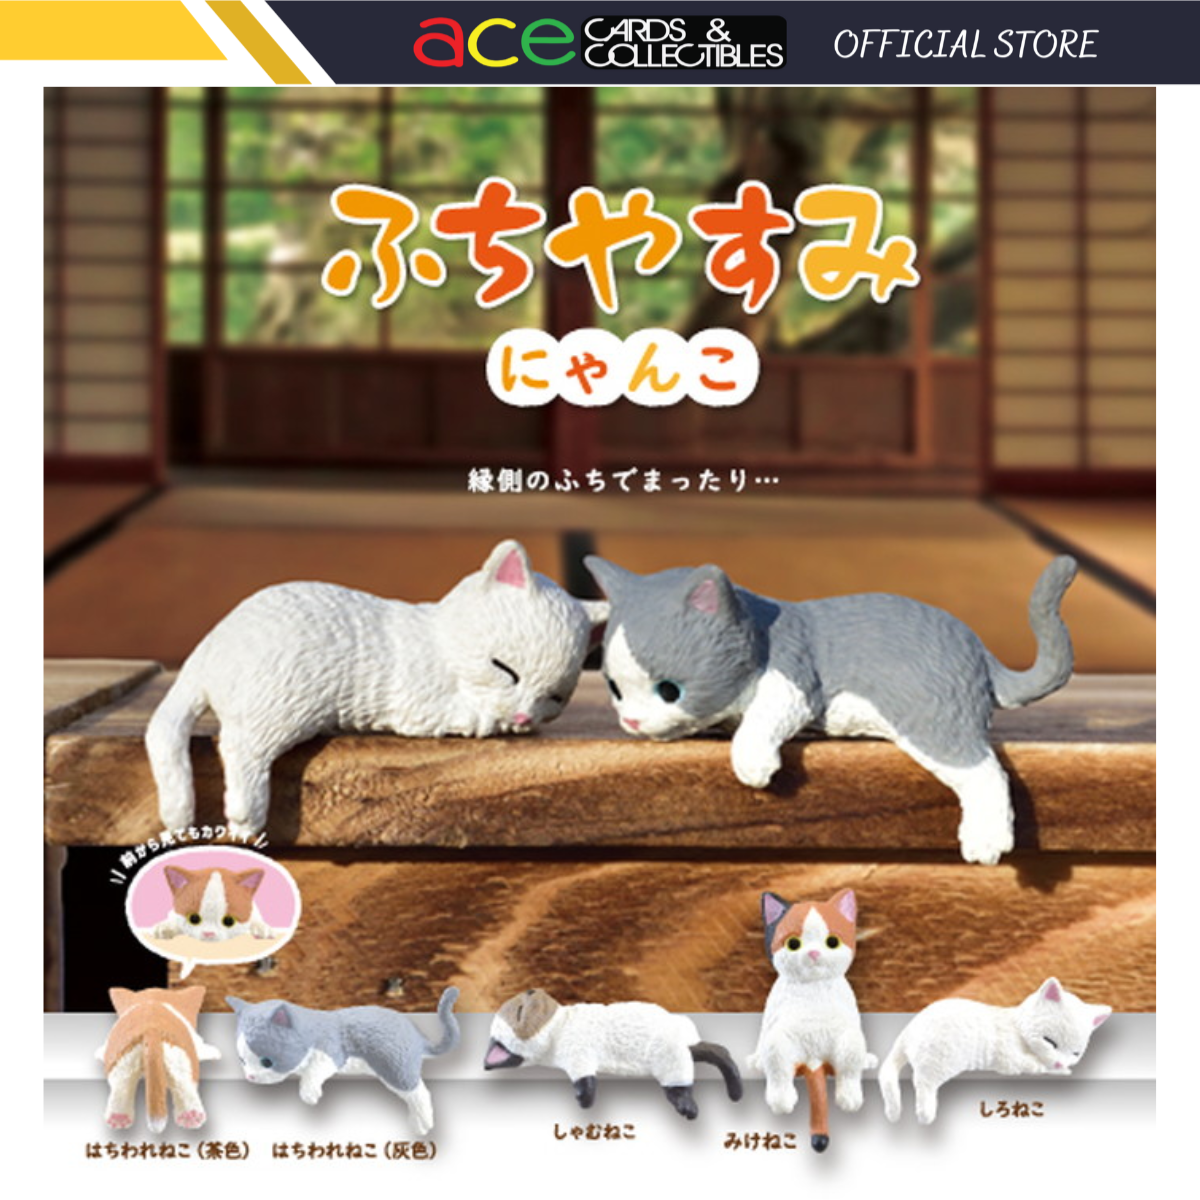 Yell x Edge Rest Cat Series-Display Box (10 pcs)-Yell-Ace Cards &amp; Collectibles